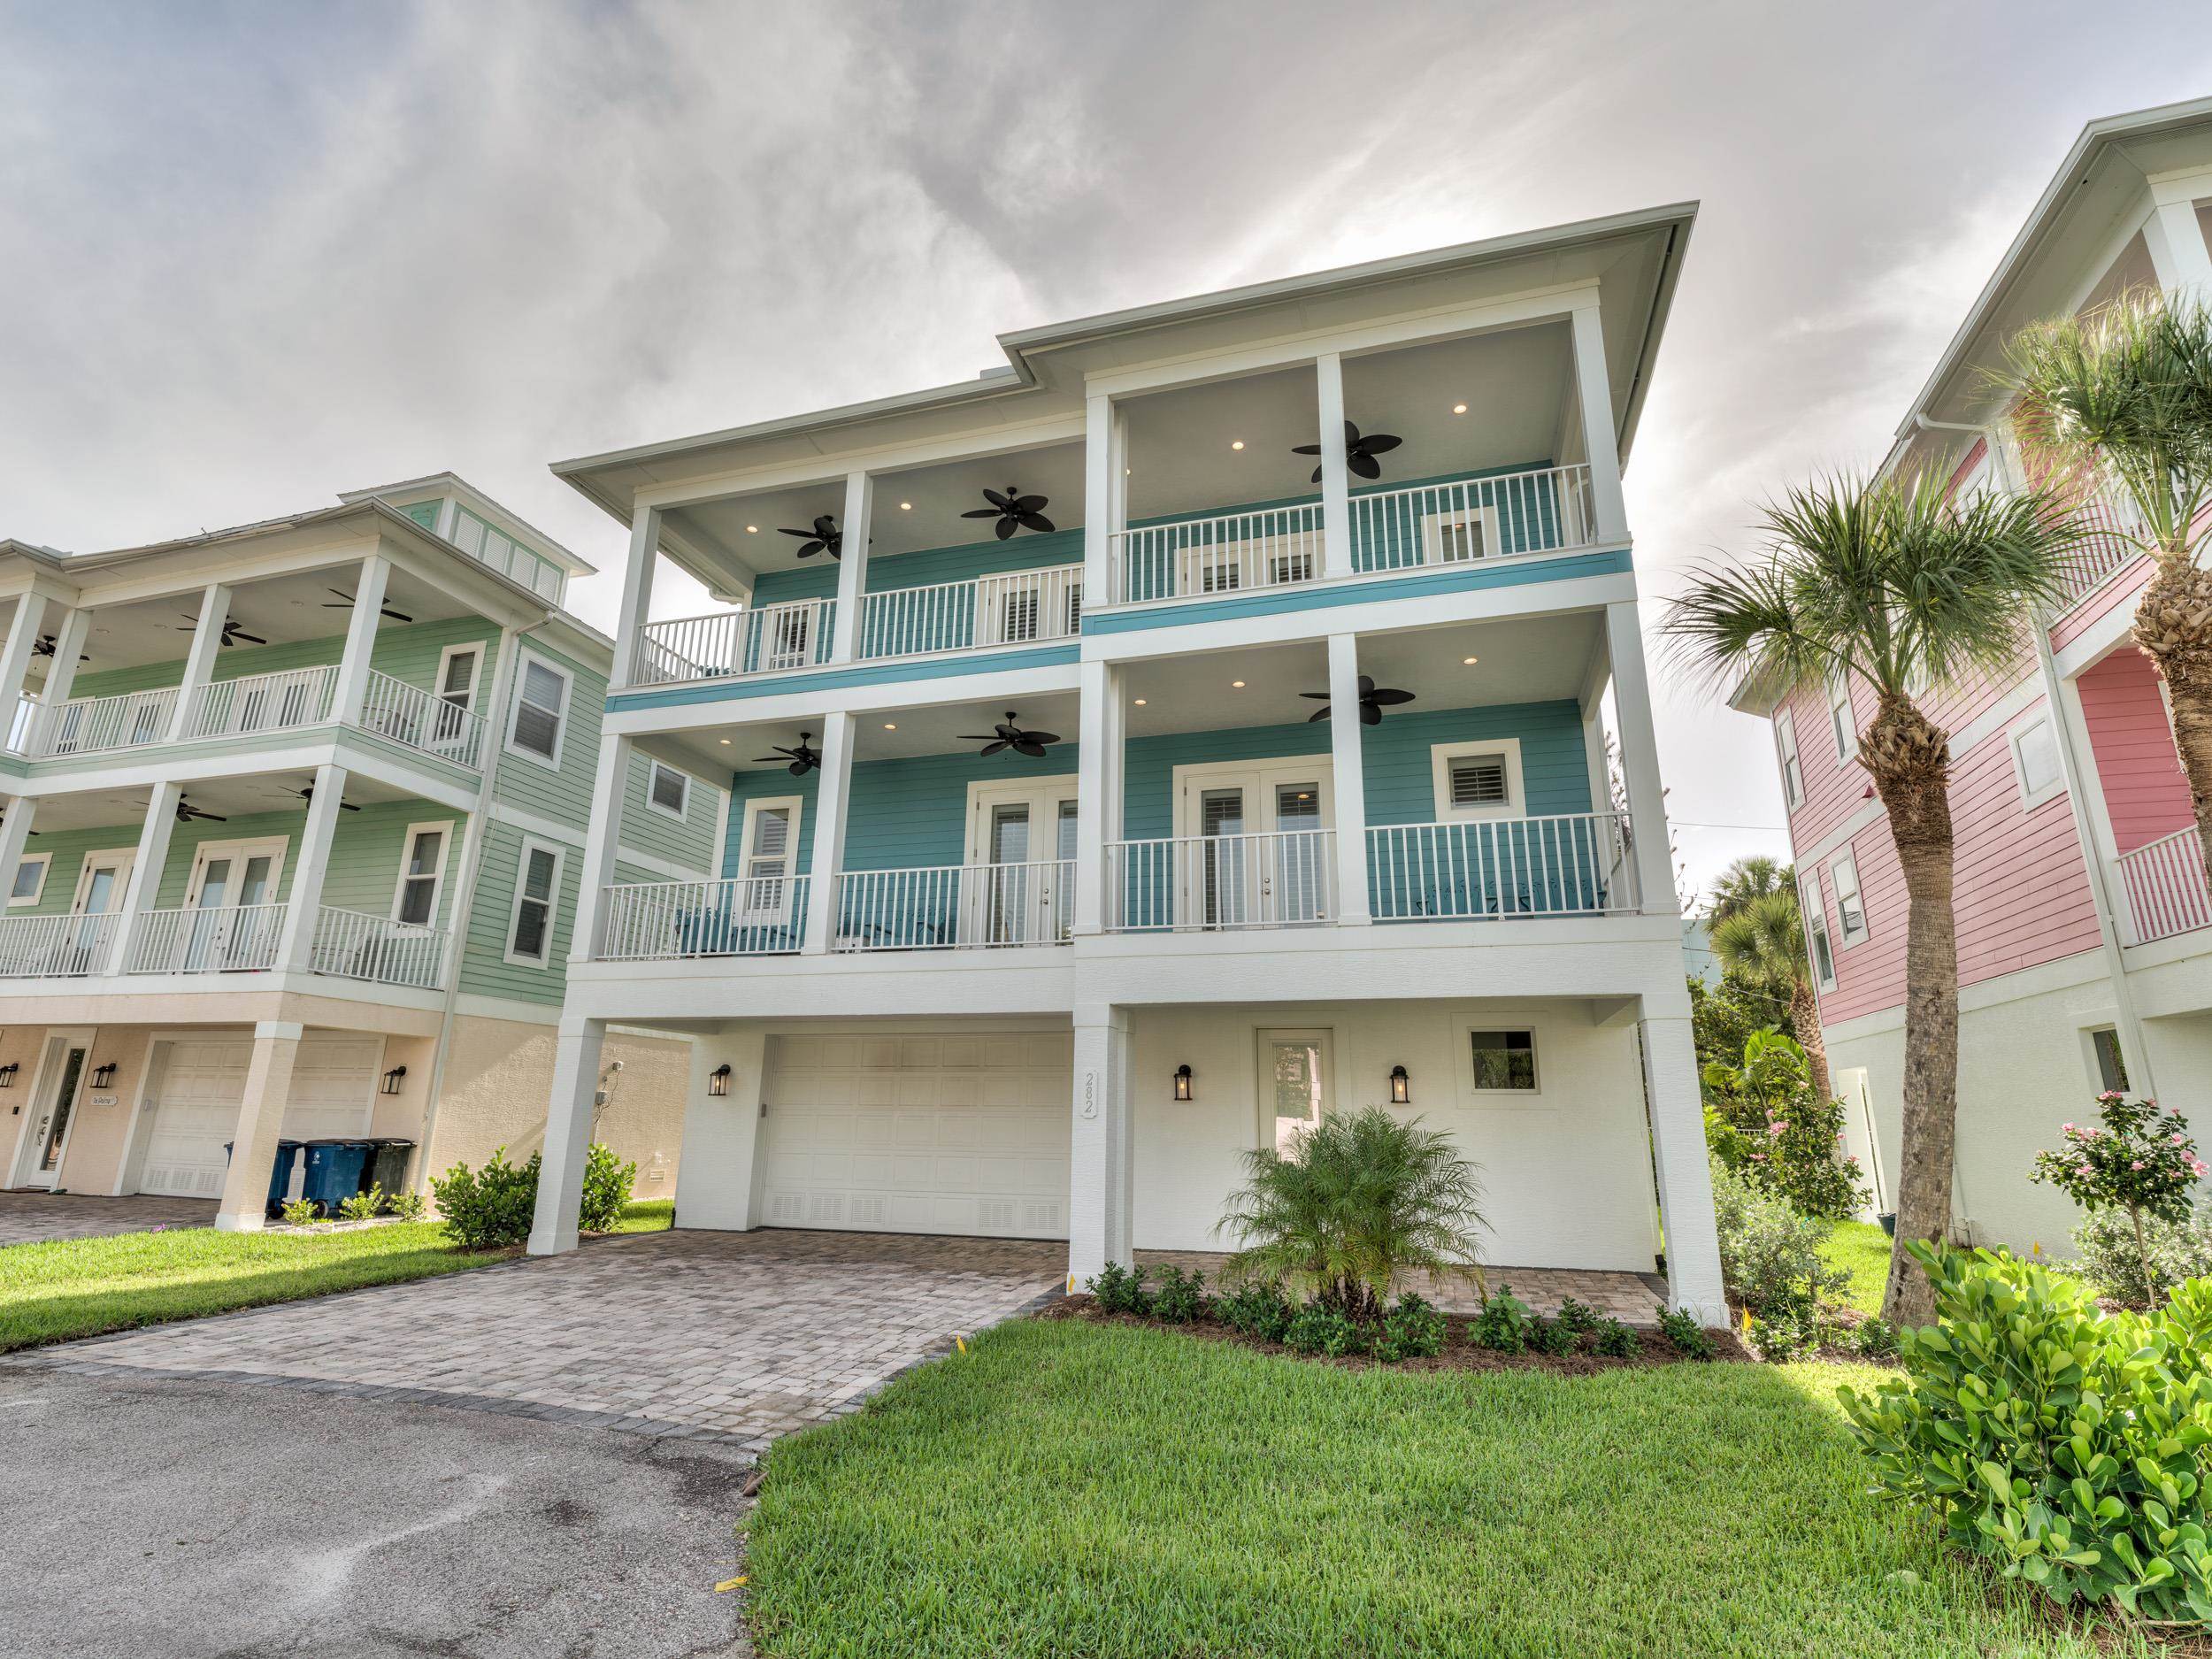 282 Delmar Ave, Fort Myers Beach, Florida 33931, 3 Bedrooms Bedrooms, ,2 BathroomsBathrooms,Condo,For Sale,Delmar Ave,2230796